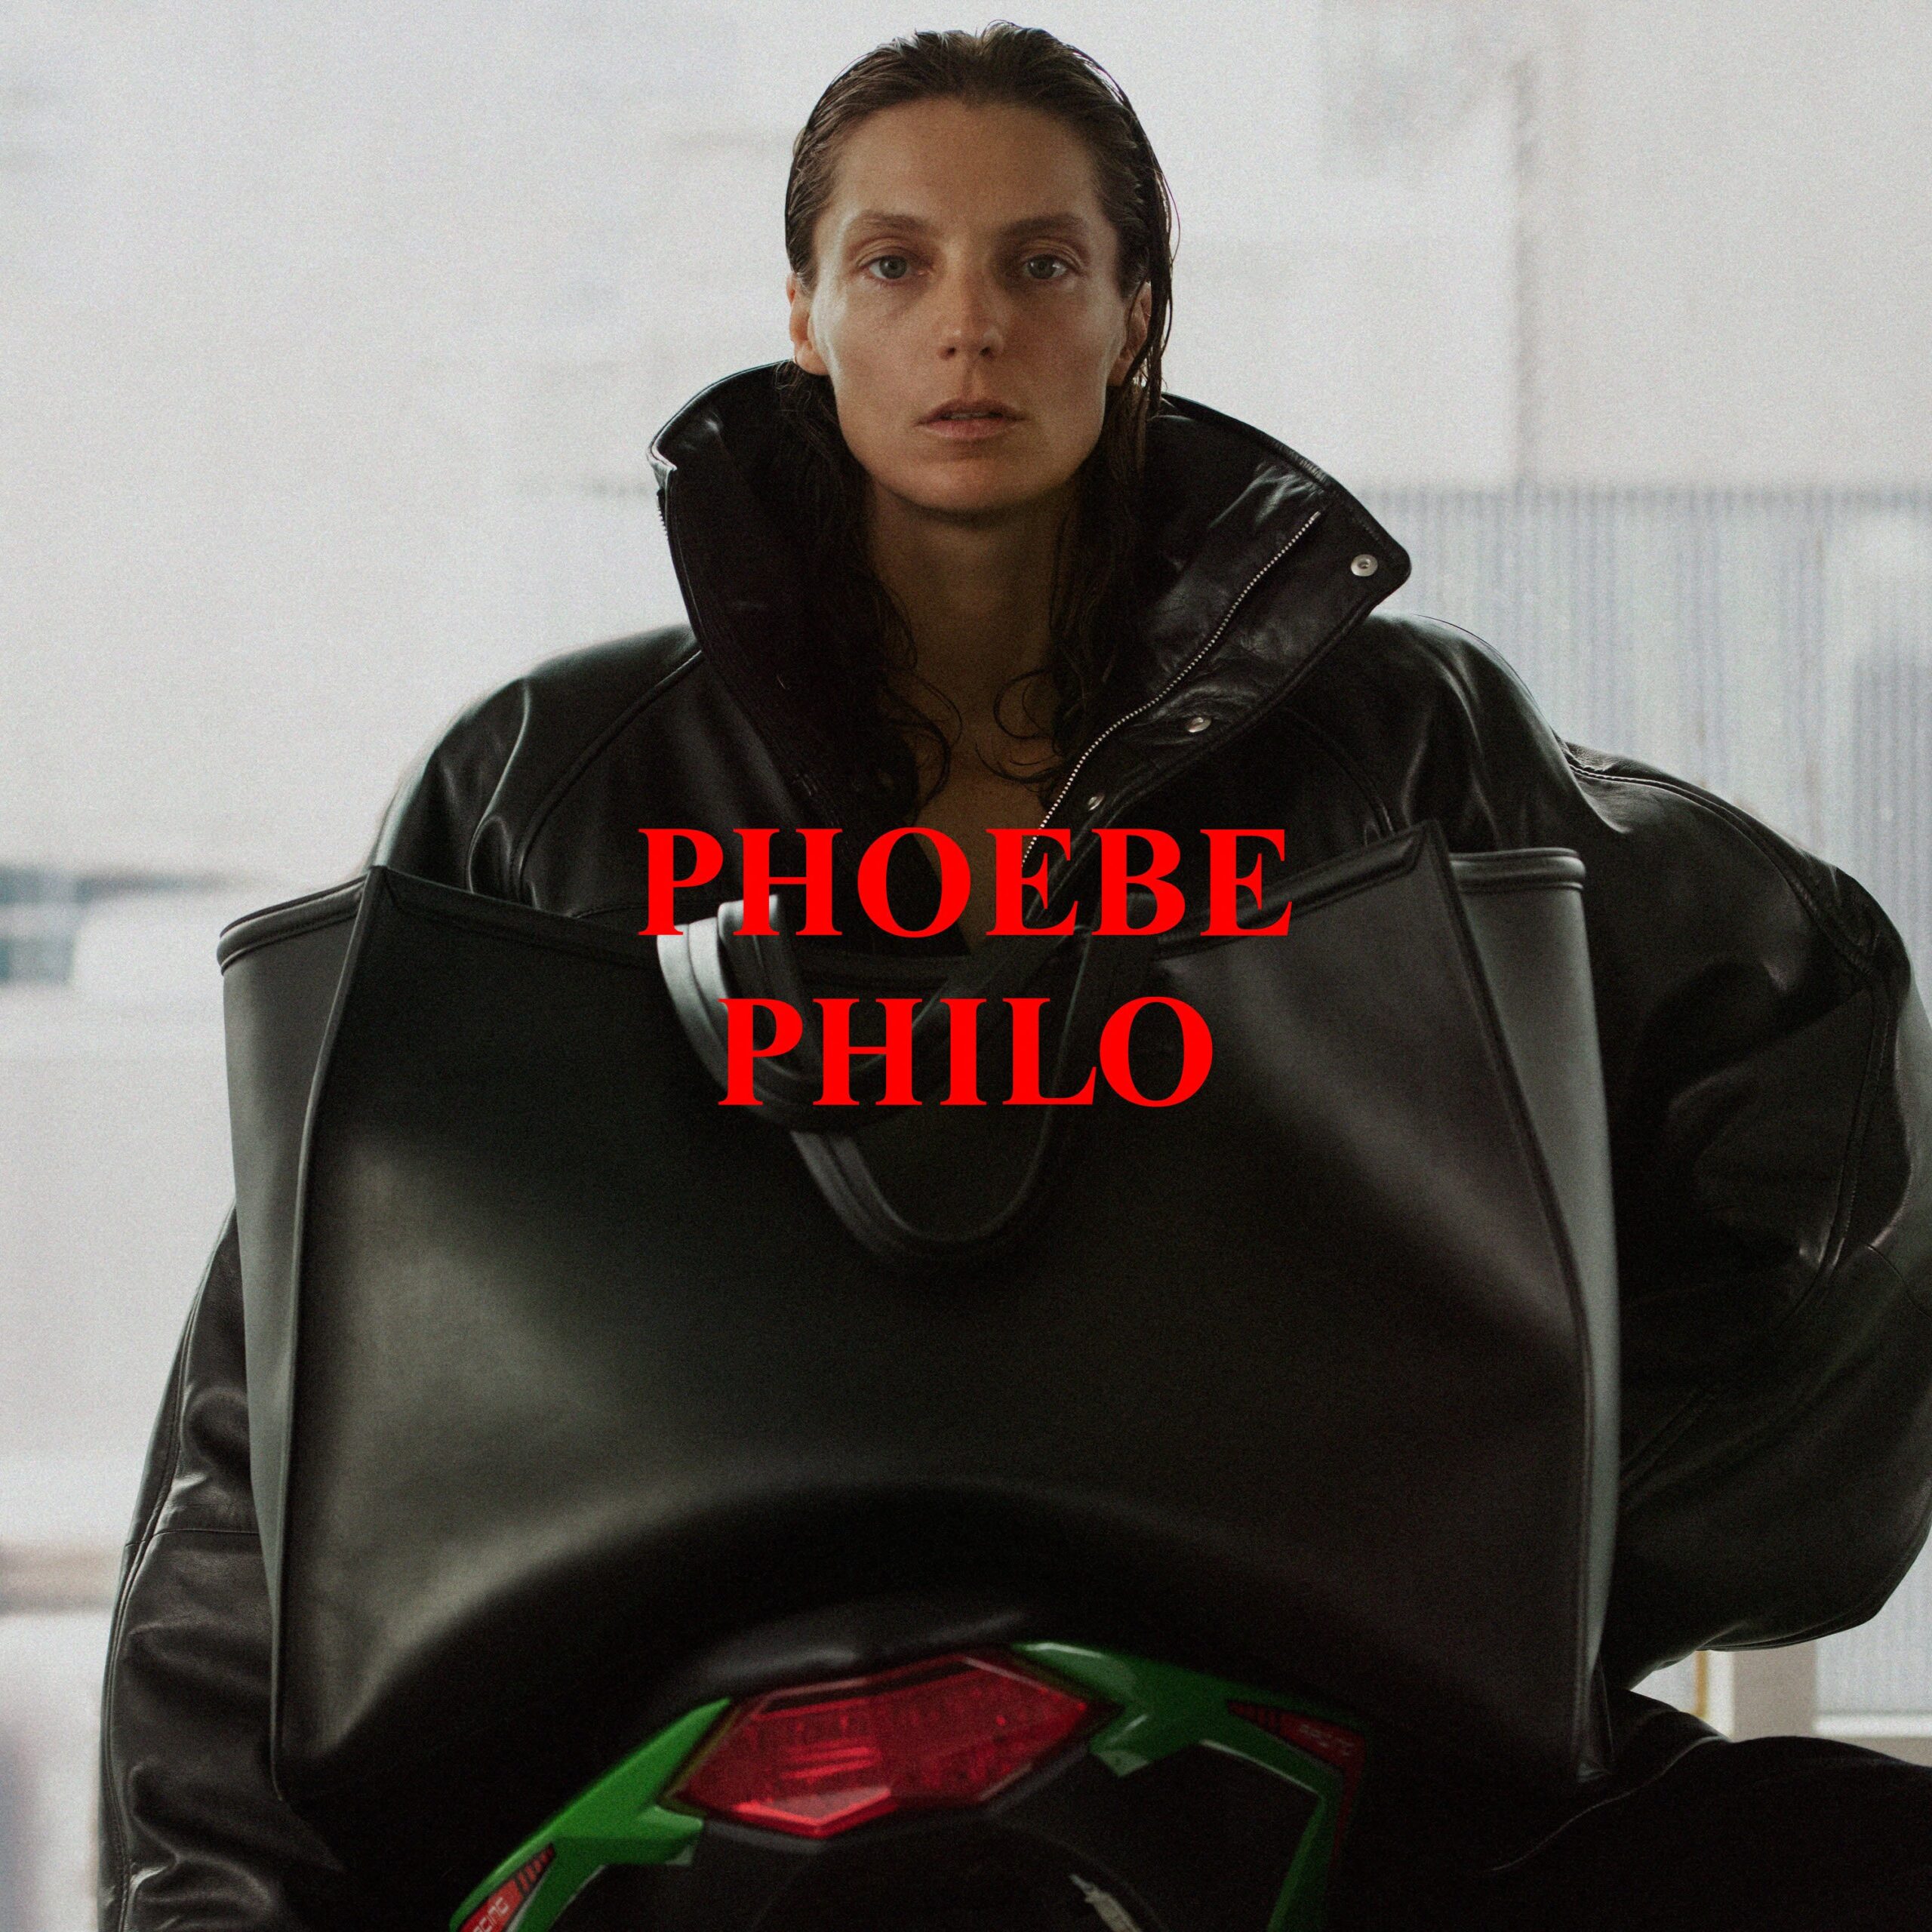 Daria Werbowy for Phoebe Philo A1 campaign featuring Daria Werbowy. Courtesy Phoebe Philo.